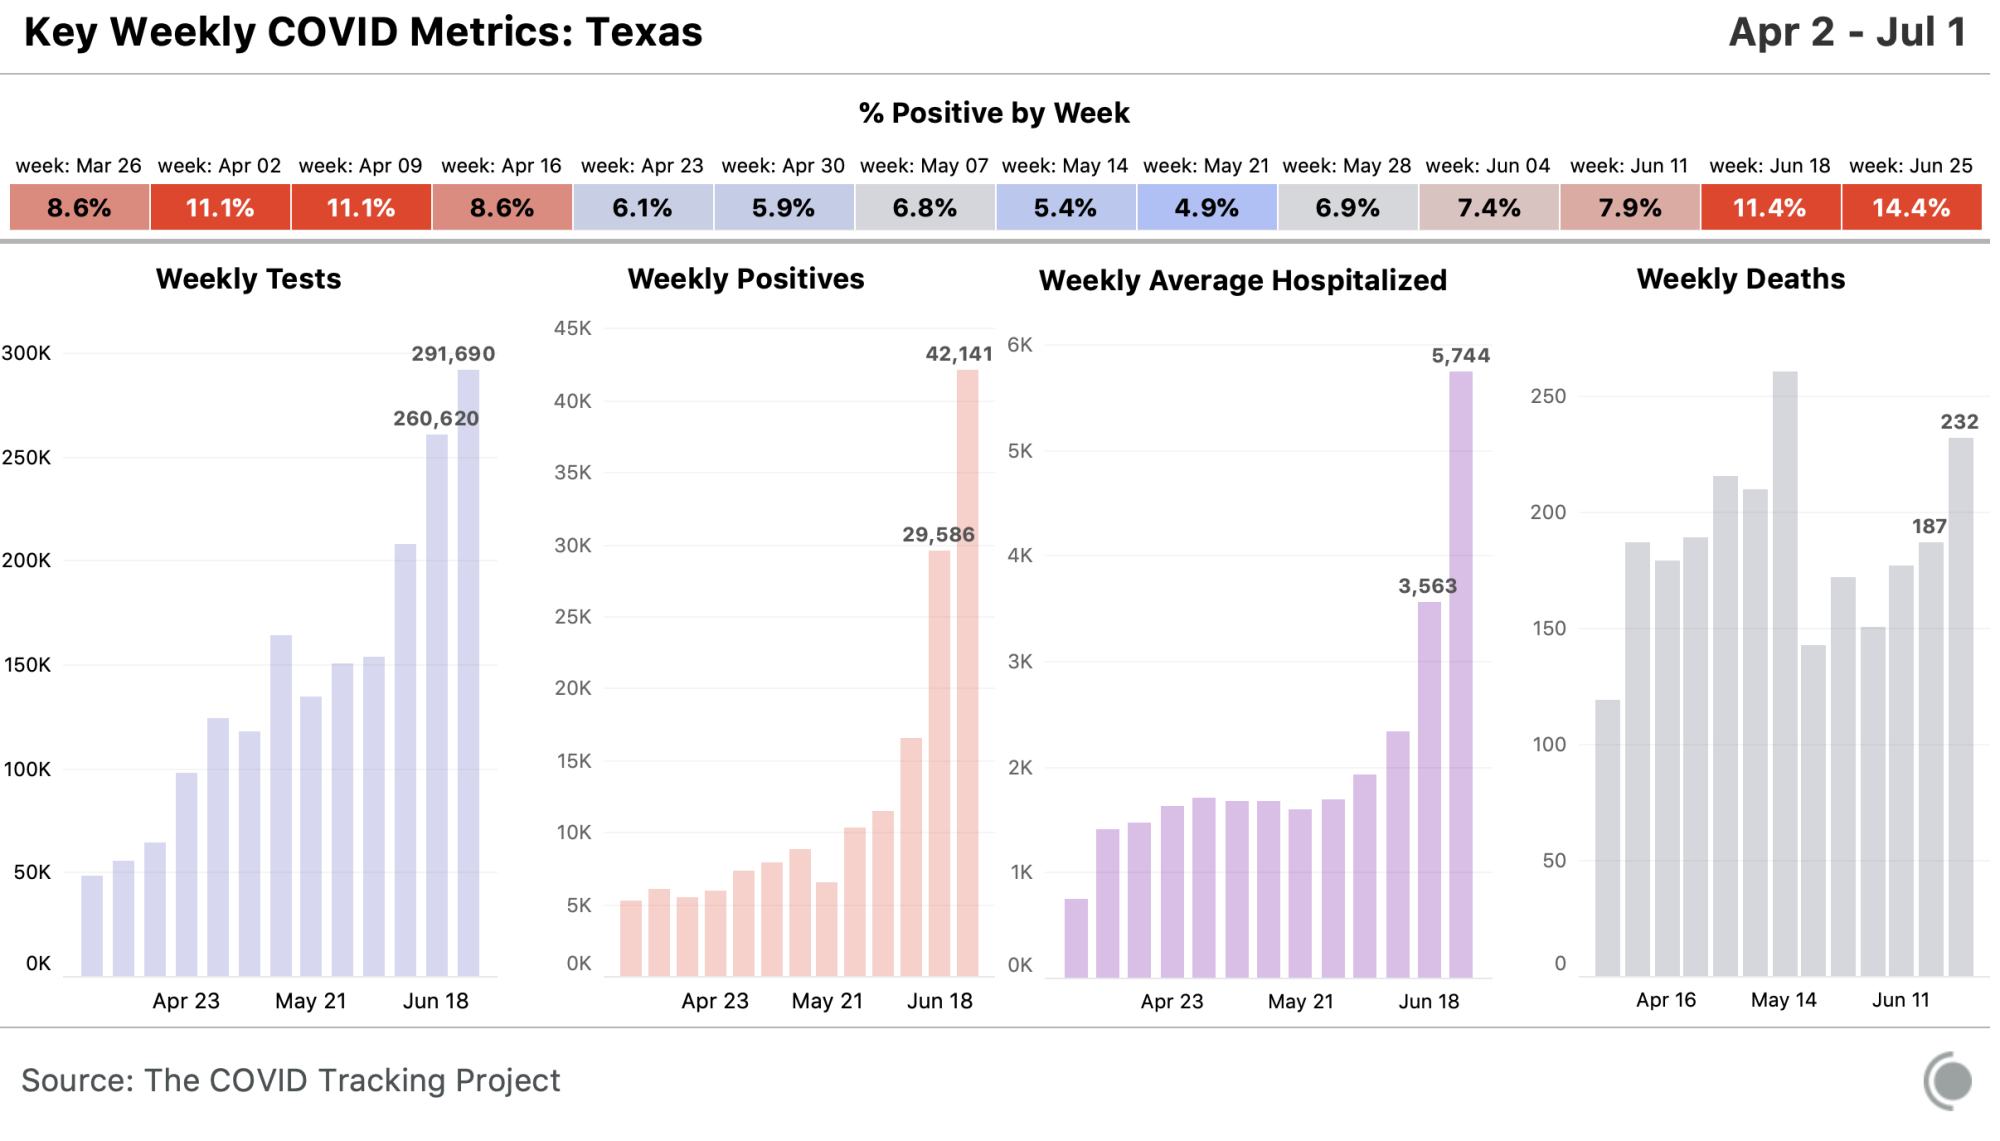 State chart for Texas, all metrics available at https://covidtracking.com/data/state/texas.